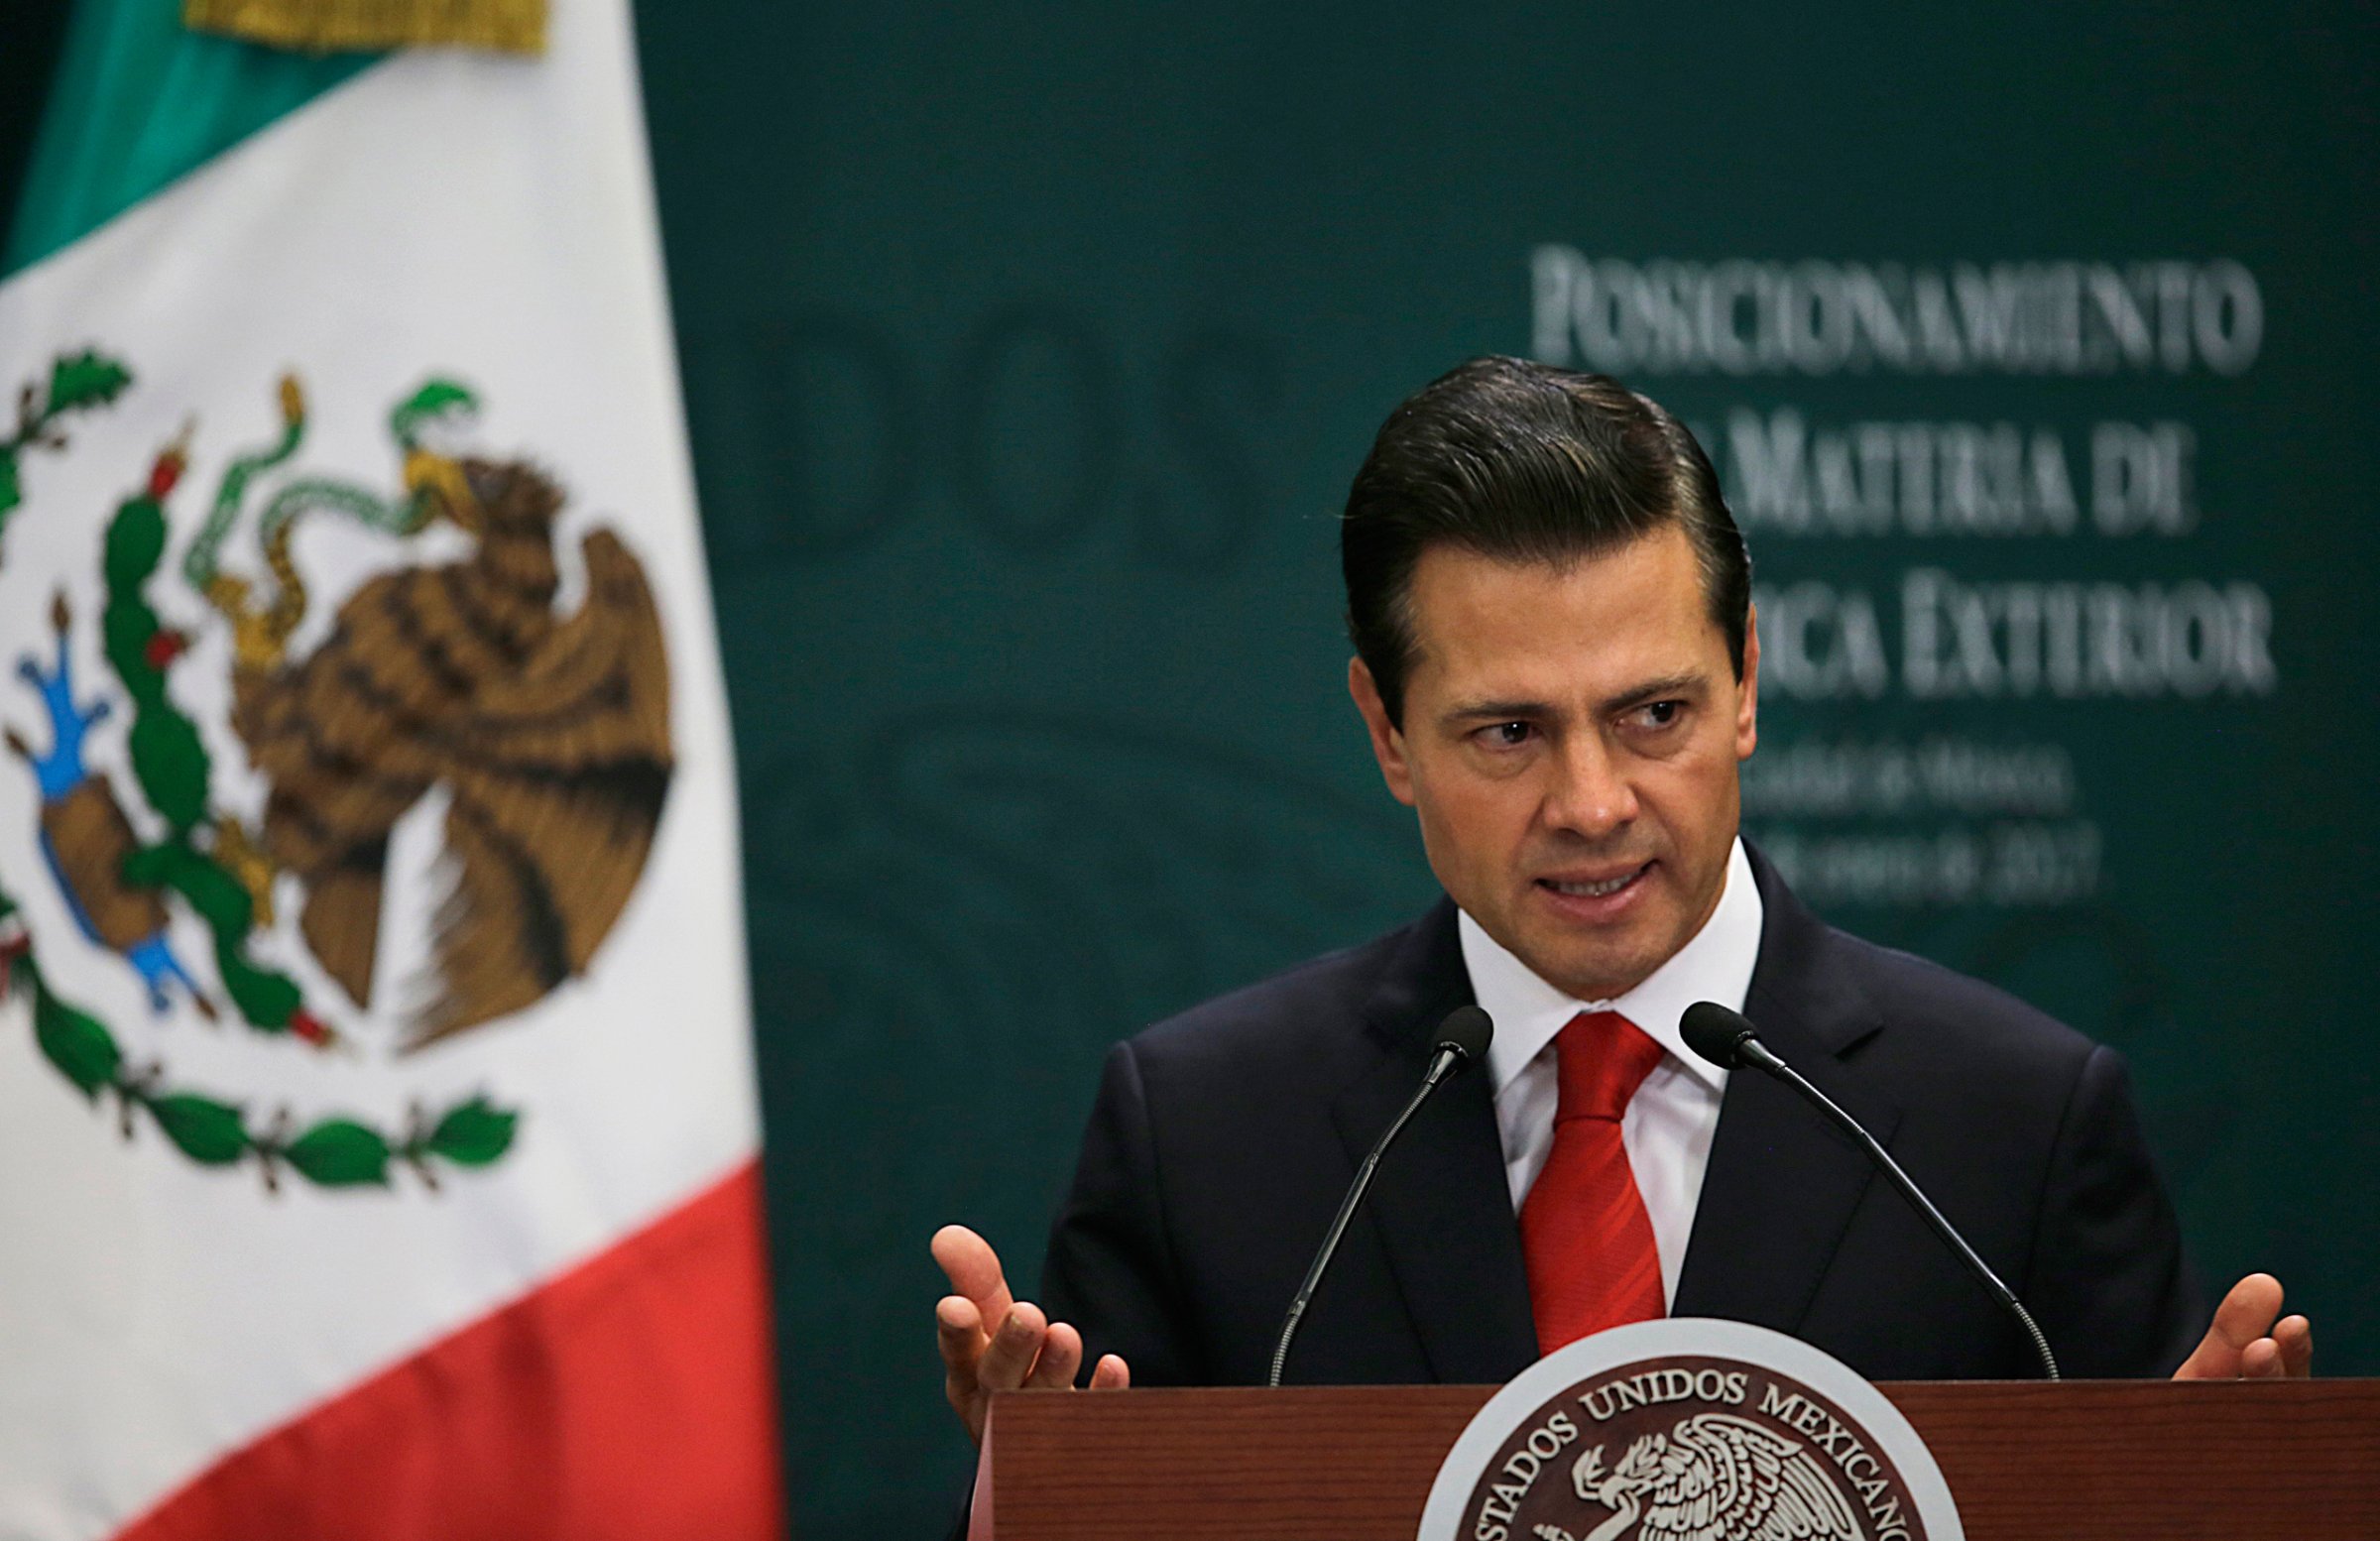 Mexico's President Enrique Pena Nieto speaks during a press conference at Los Pinos presidential residence in Mexico City, Monday, Jan. 23, 2017. Pena Nieto said Monday that Mexico's attitude towards the Donald Trump administration should not be aggressive or biased, but one of dialogue. (AP Photo/Marco Ugarte)